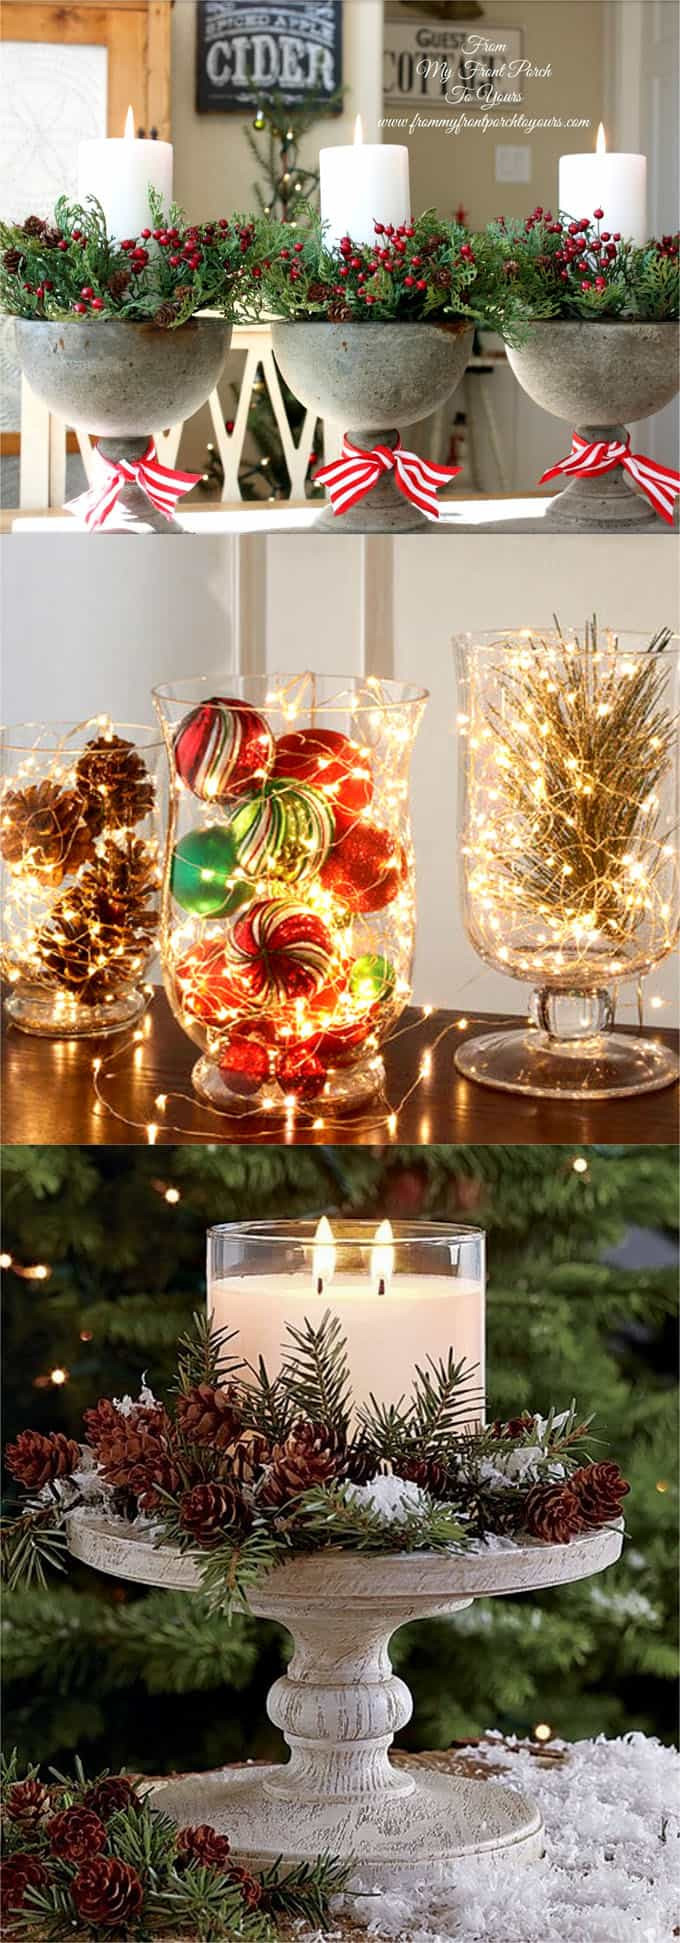 Easy DIY Christmas Centerpieces
 27 Gorgeous DIY Thanksgiving & Christmas Table Decorations